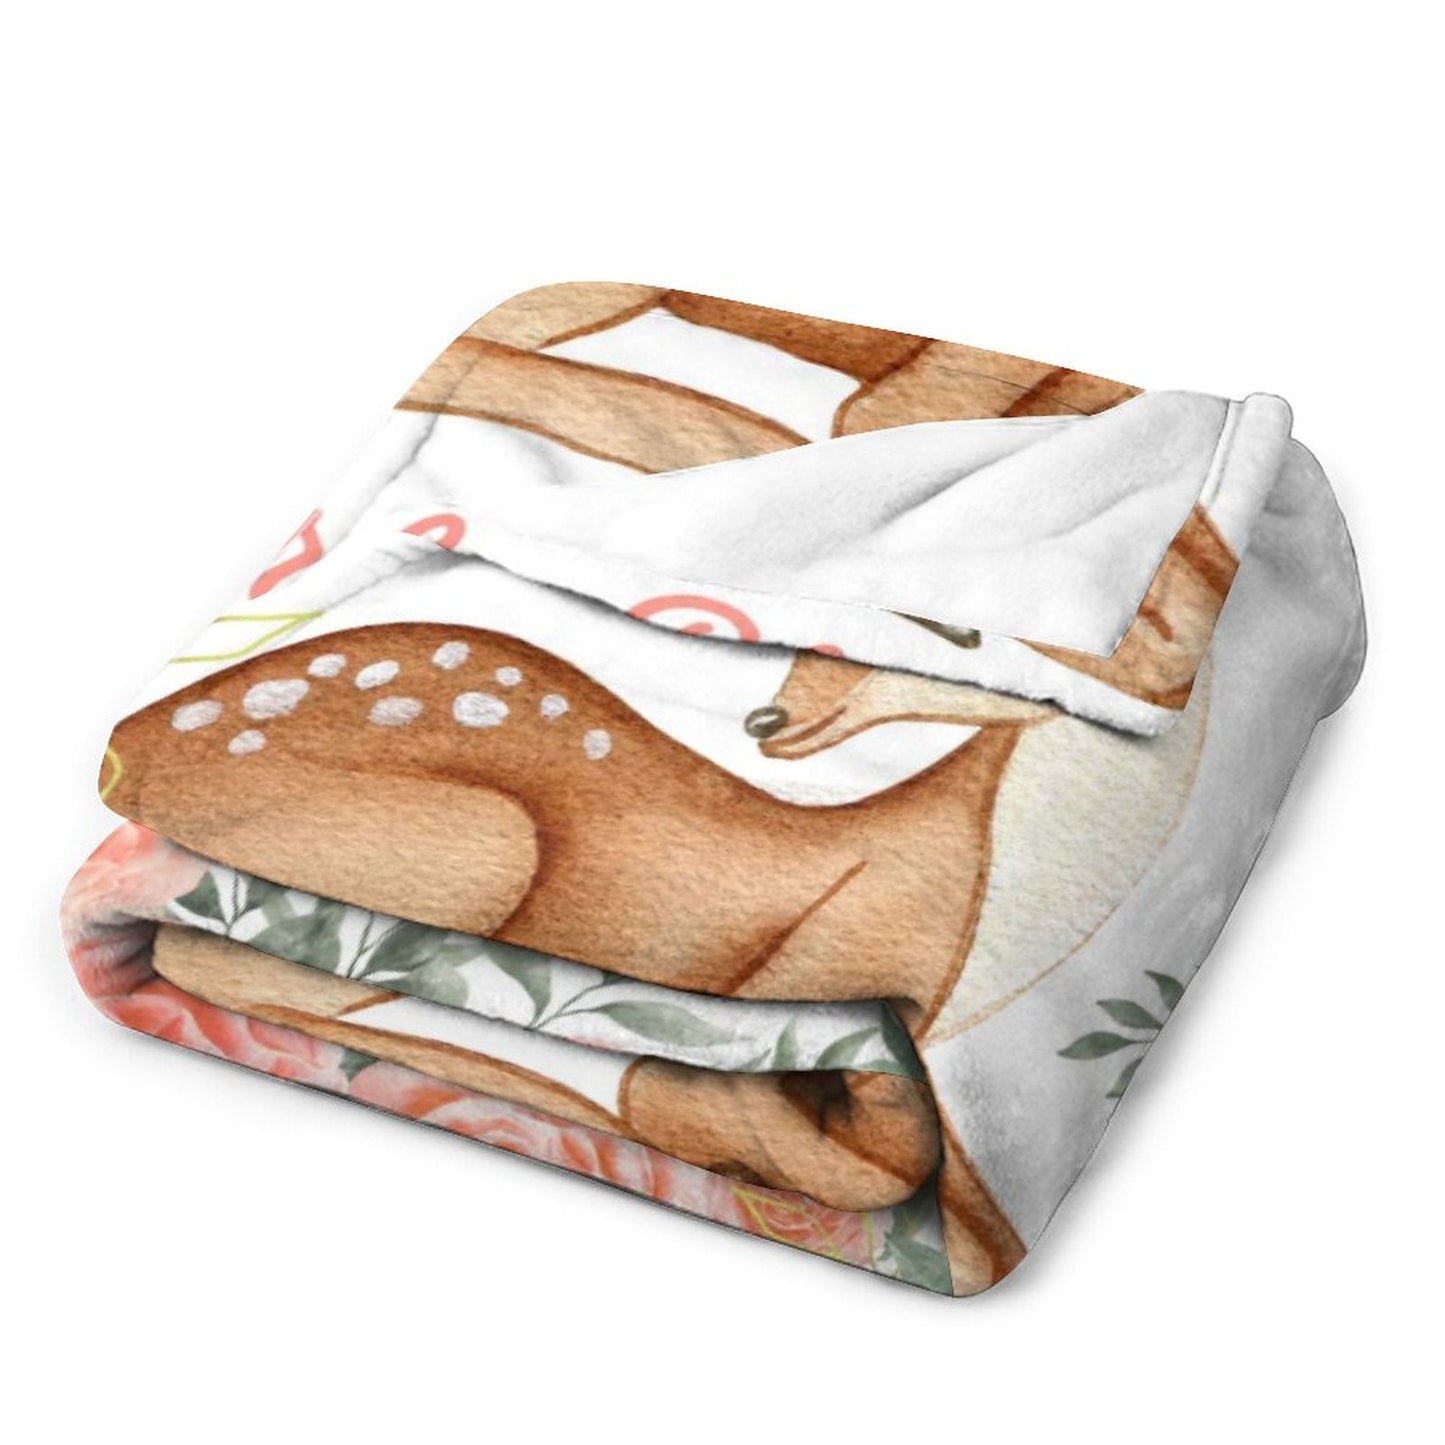 ️Personalized Girl Woodland Peach Floral Deer Baby Blanket